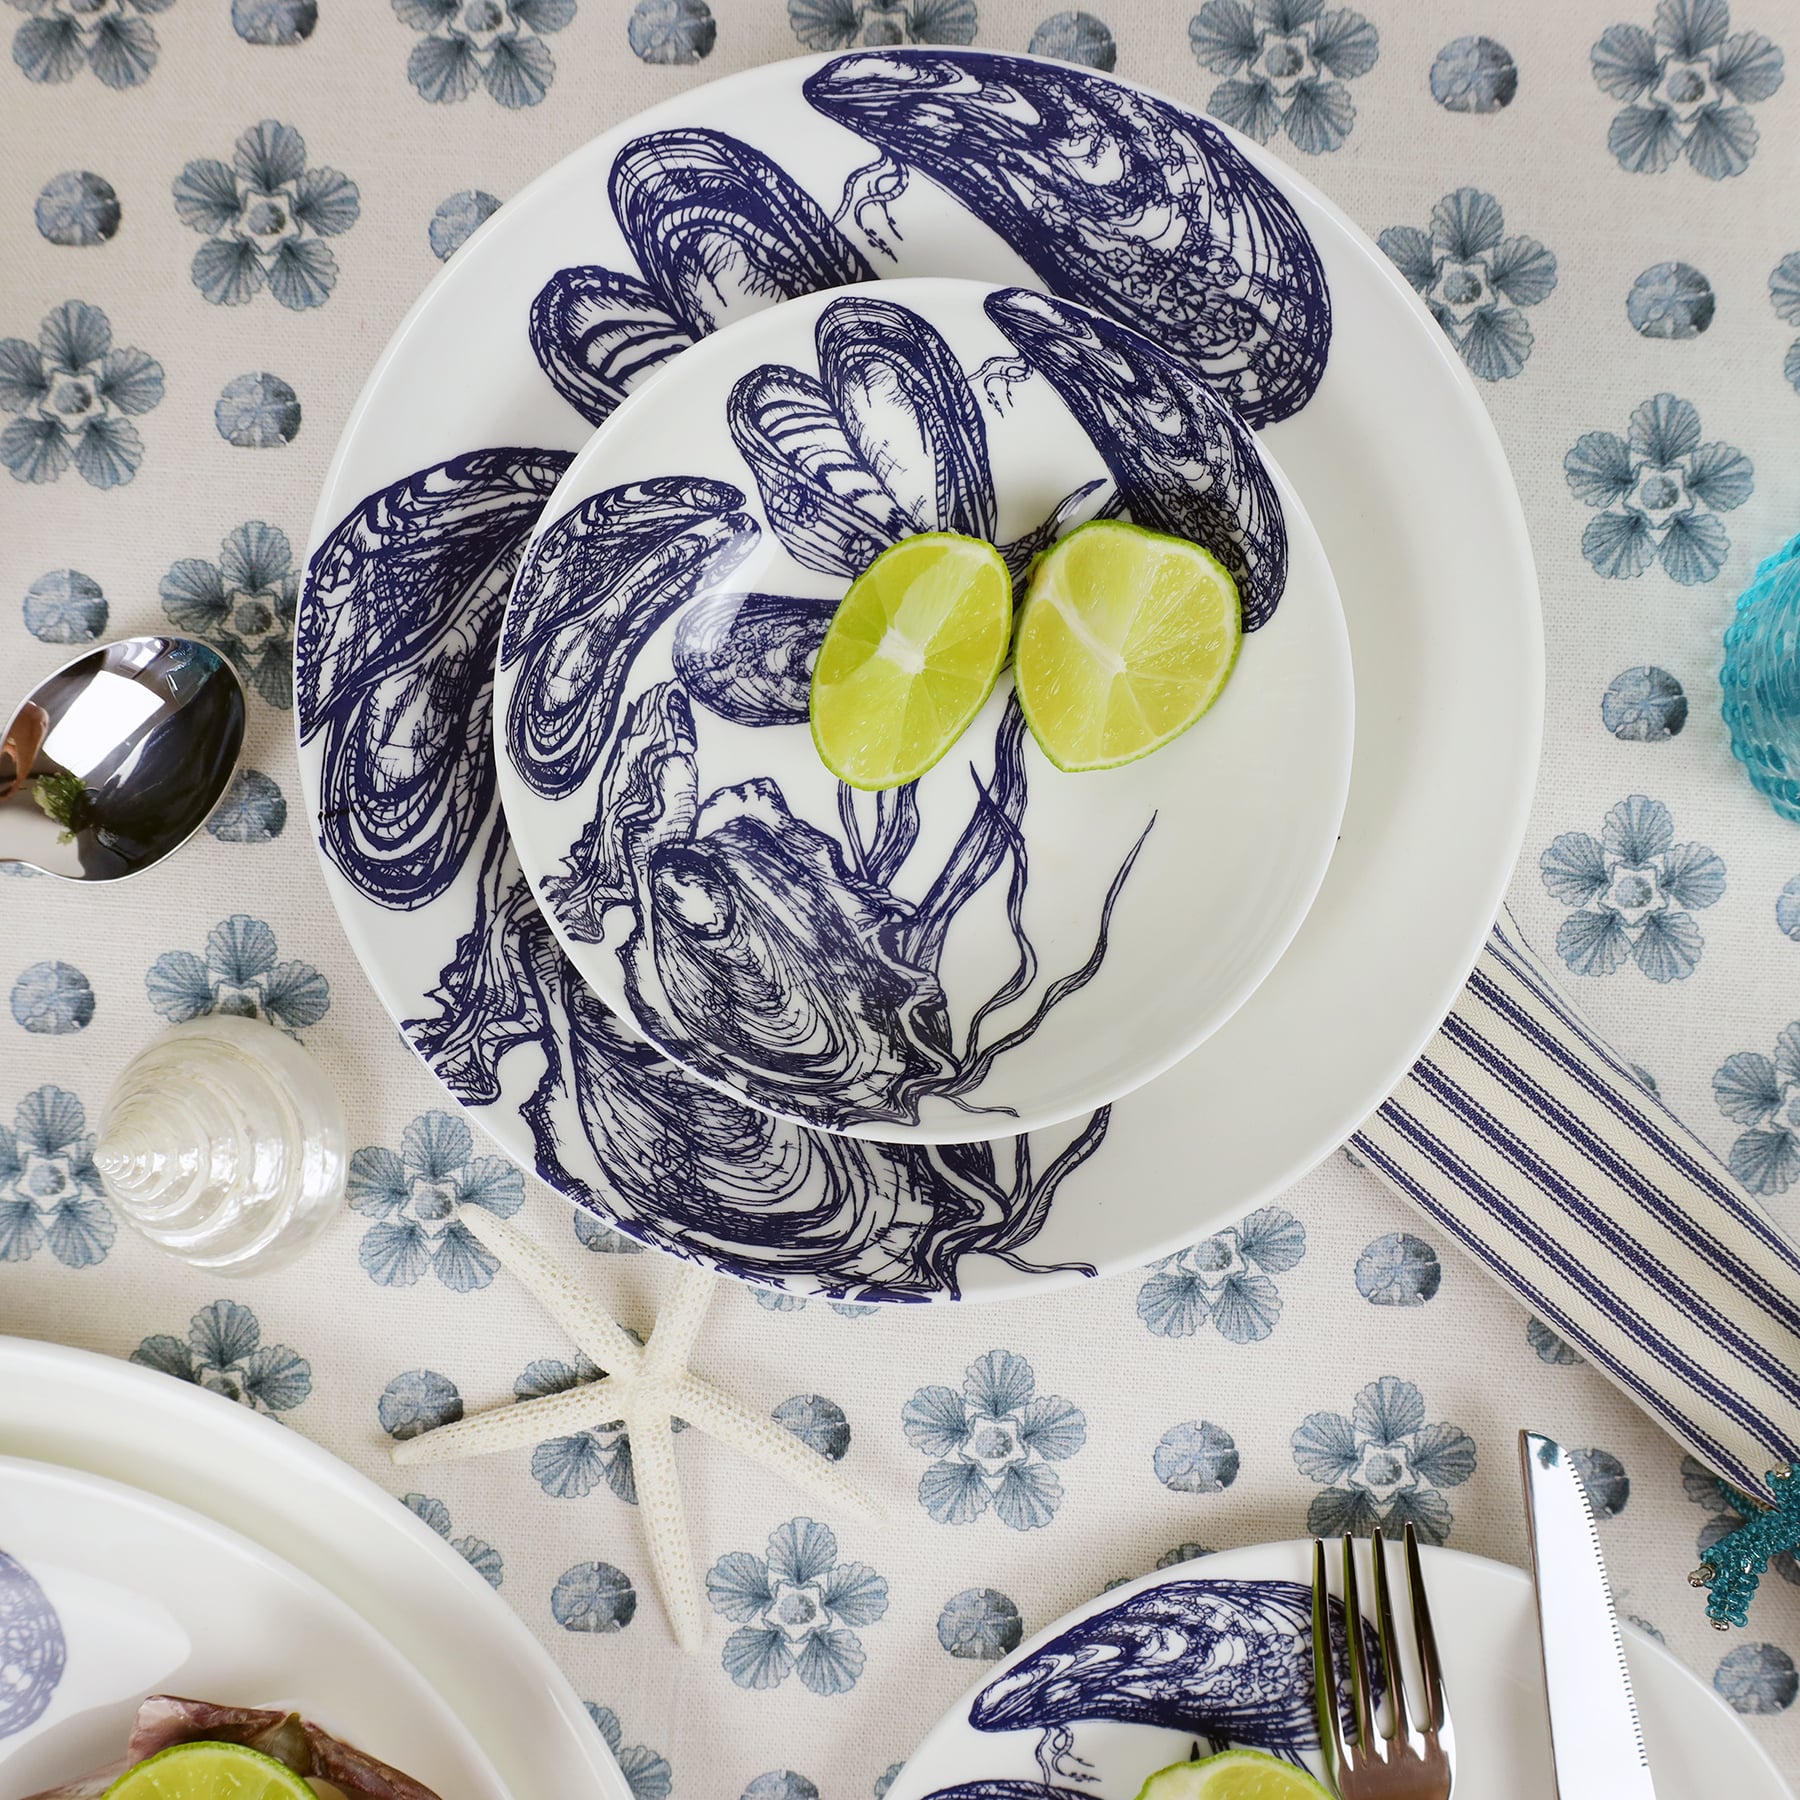 Pasta bowl in Bone China in our Classic range in Navy and white in the Mussel design, and a smaller bowl placed inside with a couple of limes.All placed on mini star fabric and other pieces of table decorations and another plate is in the foreground